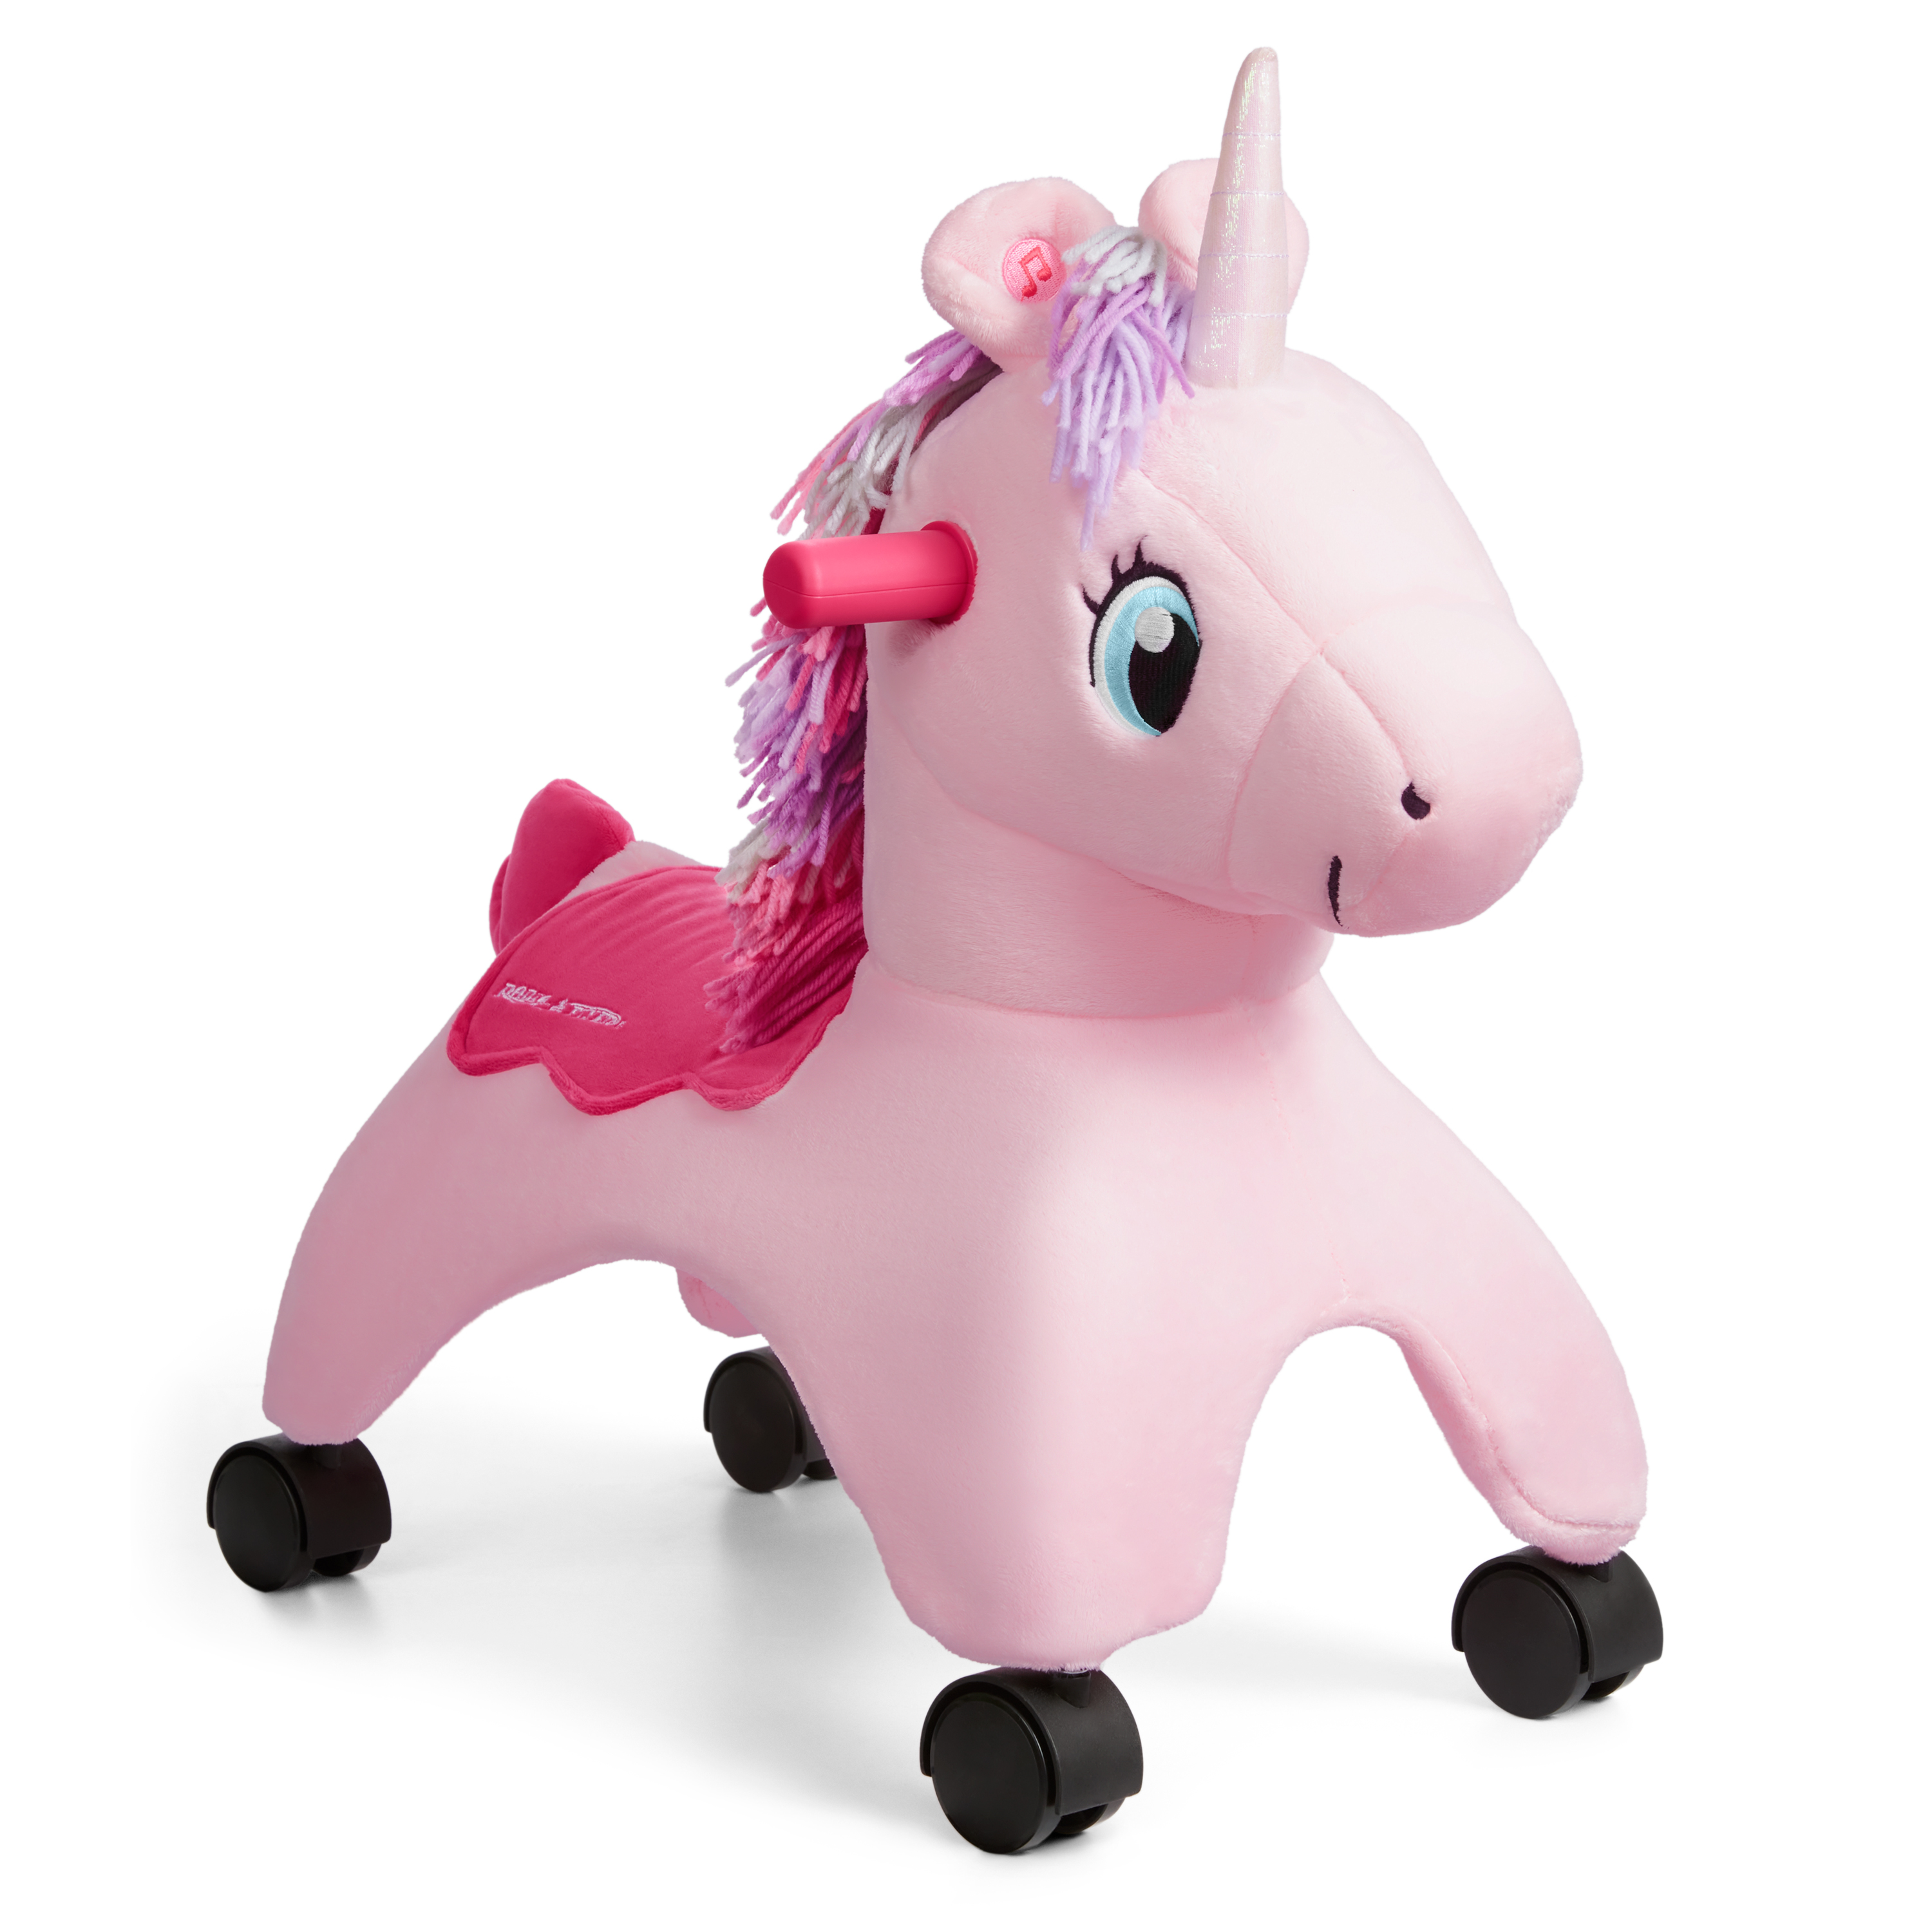 Model 688 Shimmer the Magical Touch Unicorn